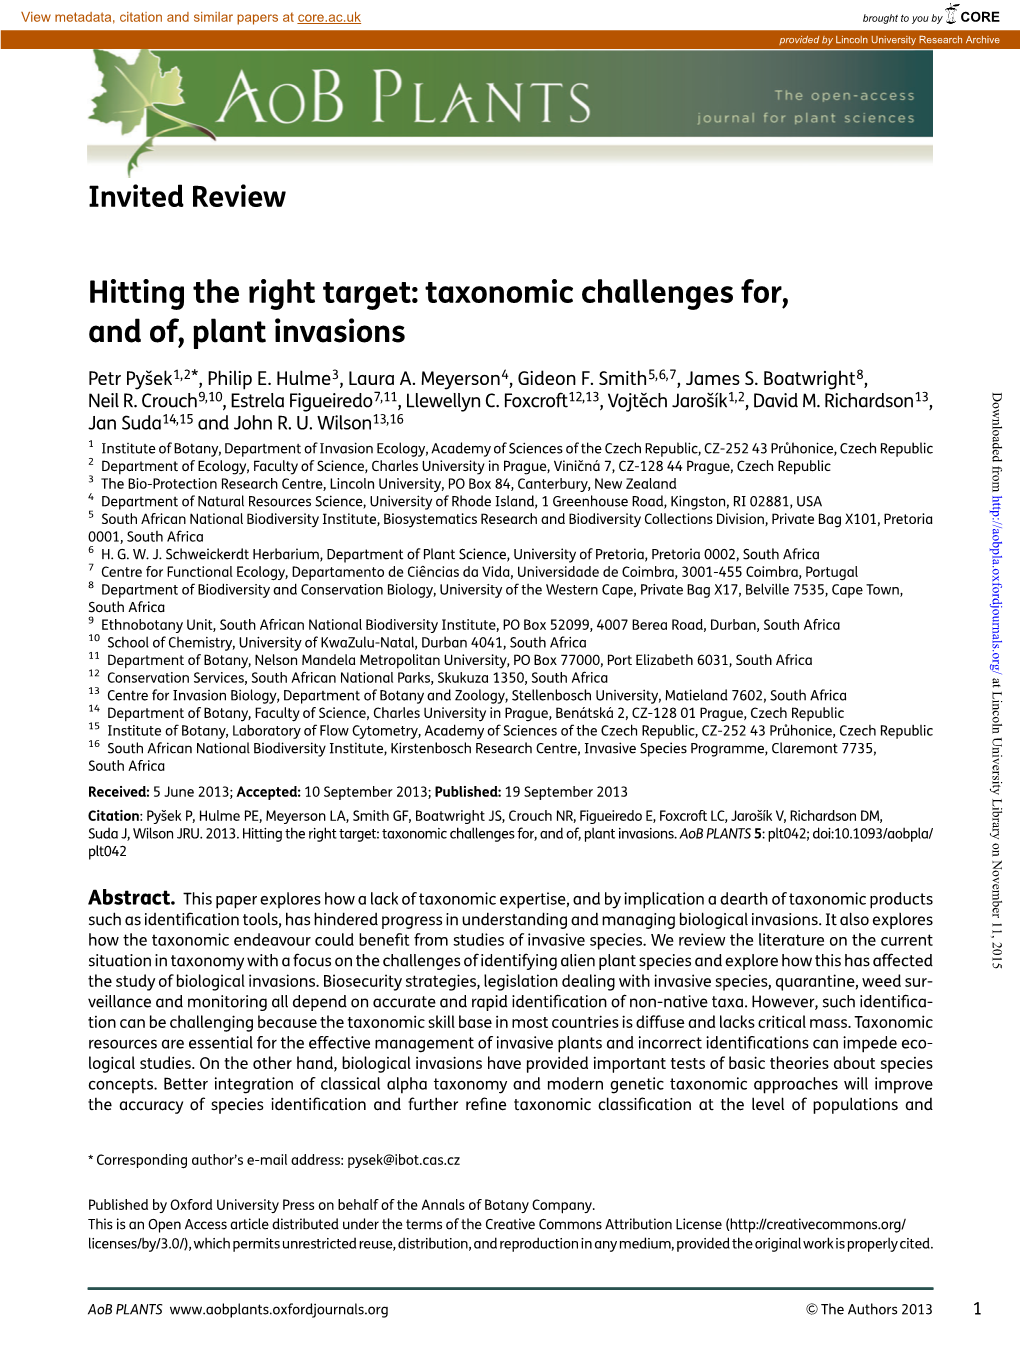 Taxonomic Challenges For, and Of, Plant Invasions